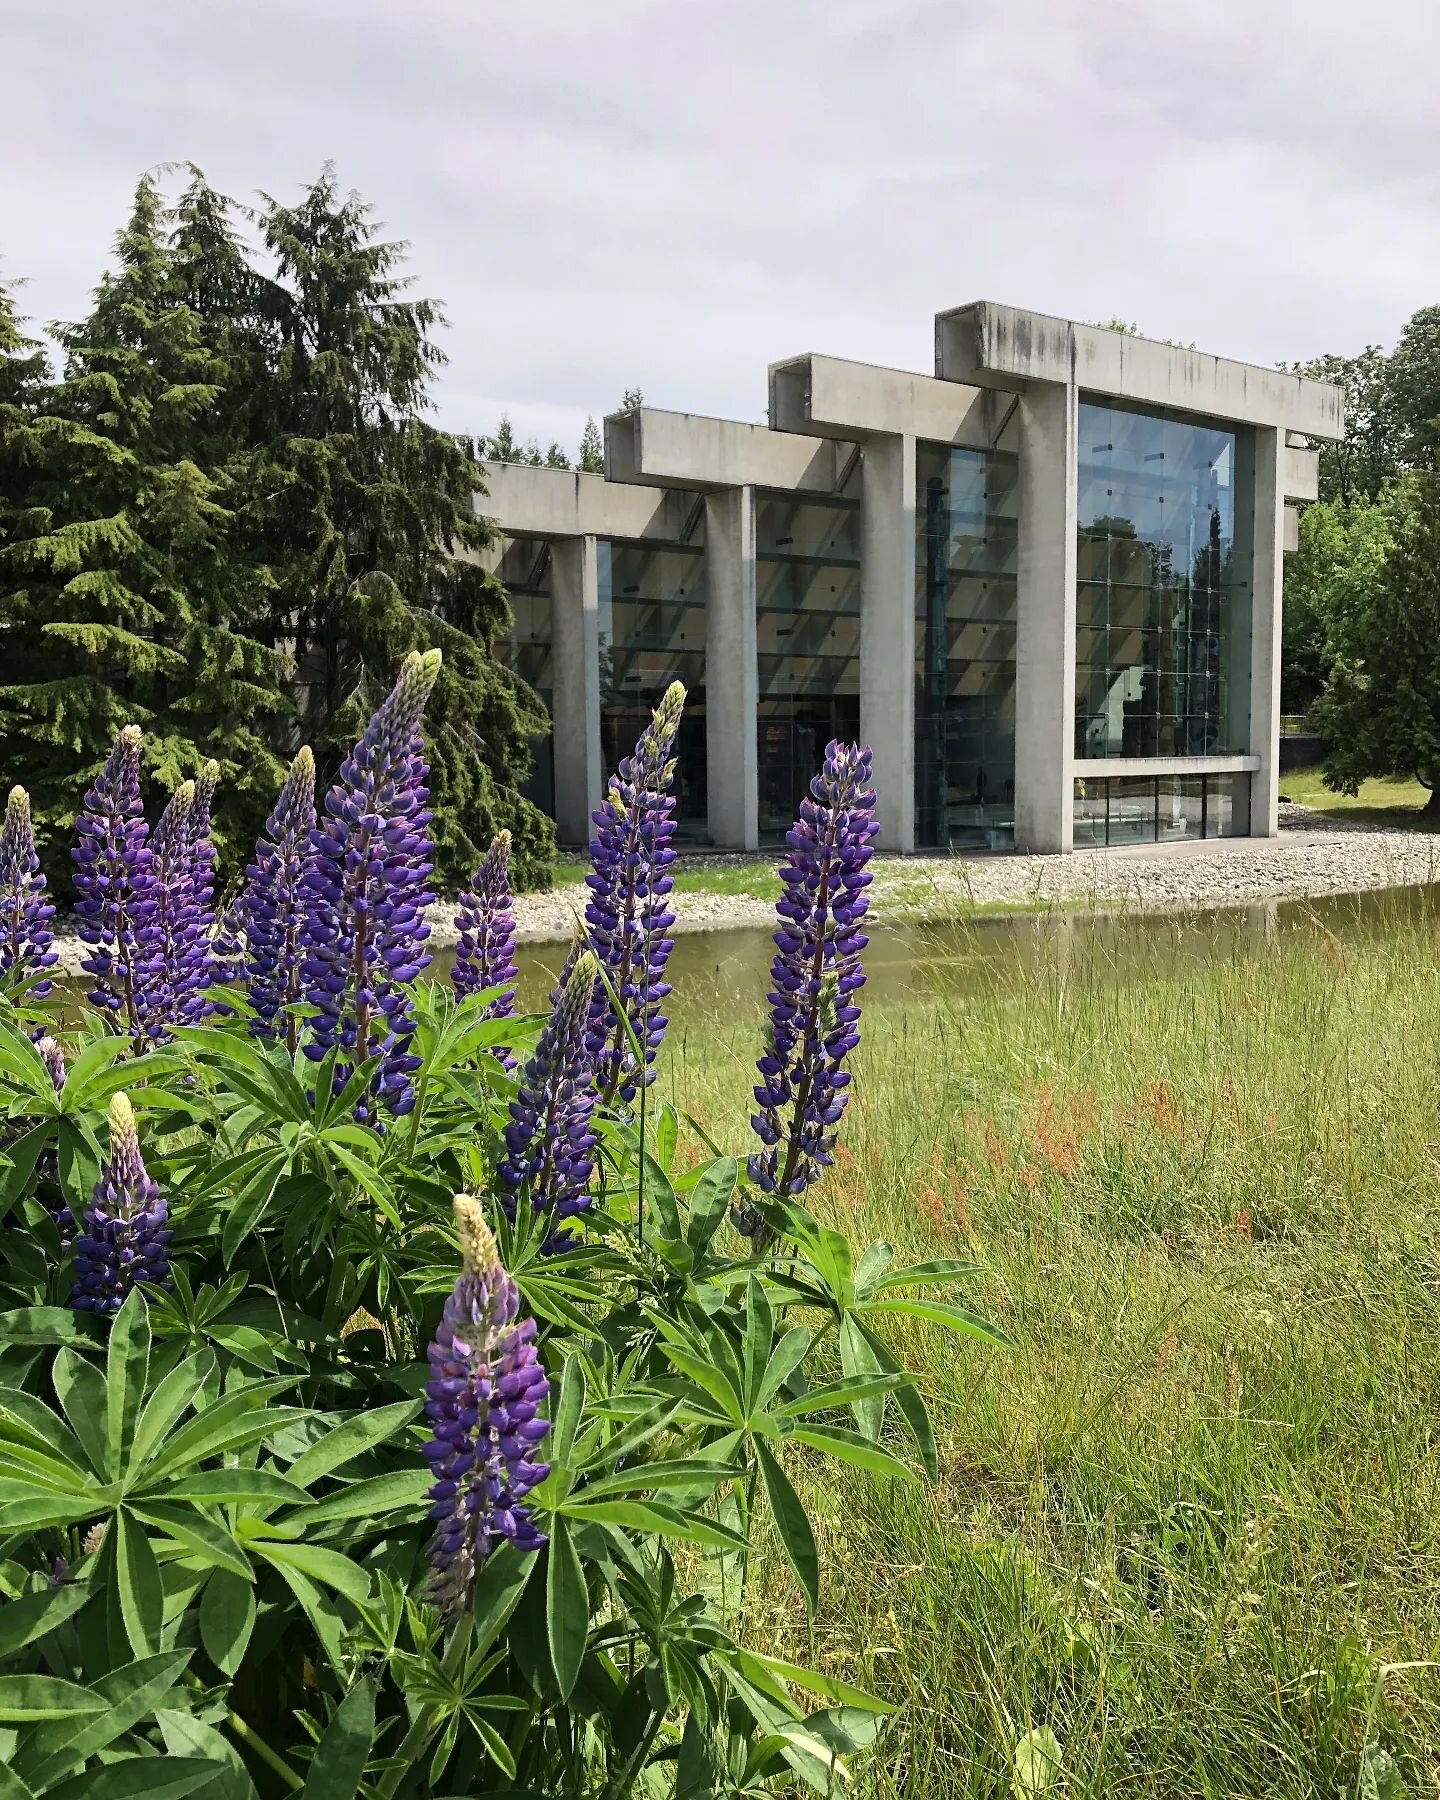 Towering up to 40 ft in height, the large glass windows of the Great Hall of the Museum of Anthropology provide an unobstructed view and enable the largest wooden carvings and cultural objects to be seen in daylight against a natural exterior setting